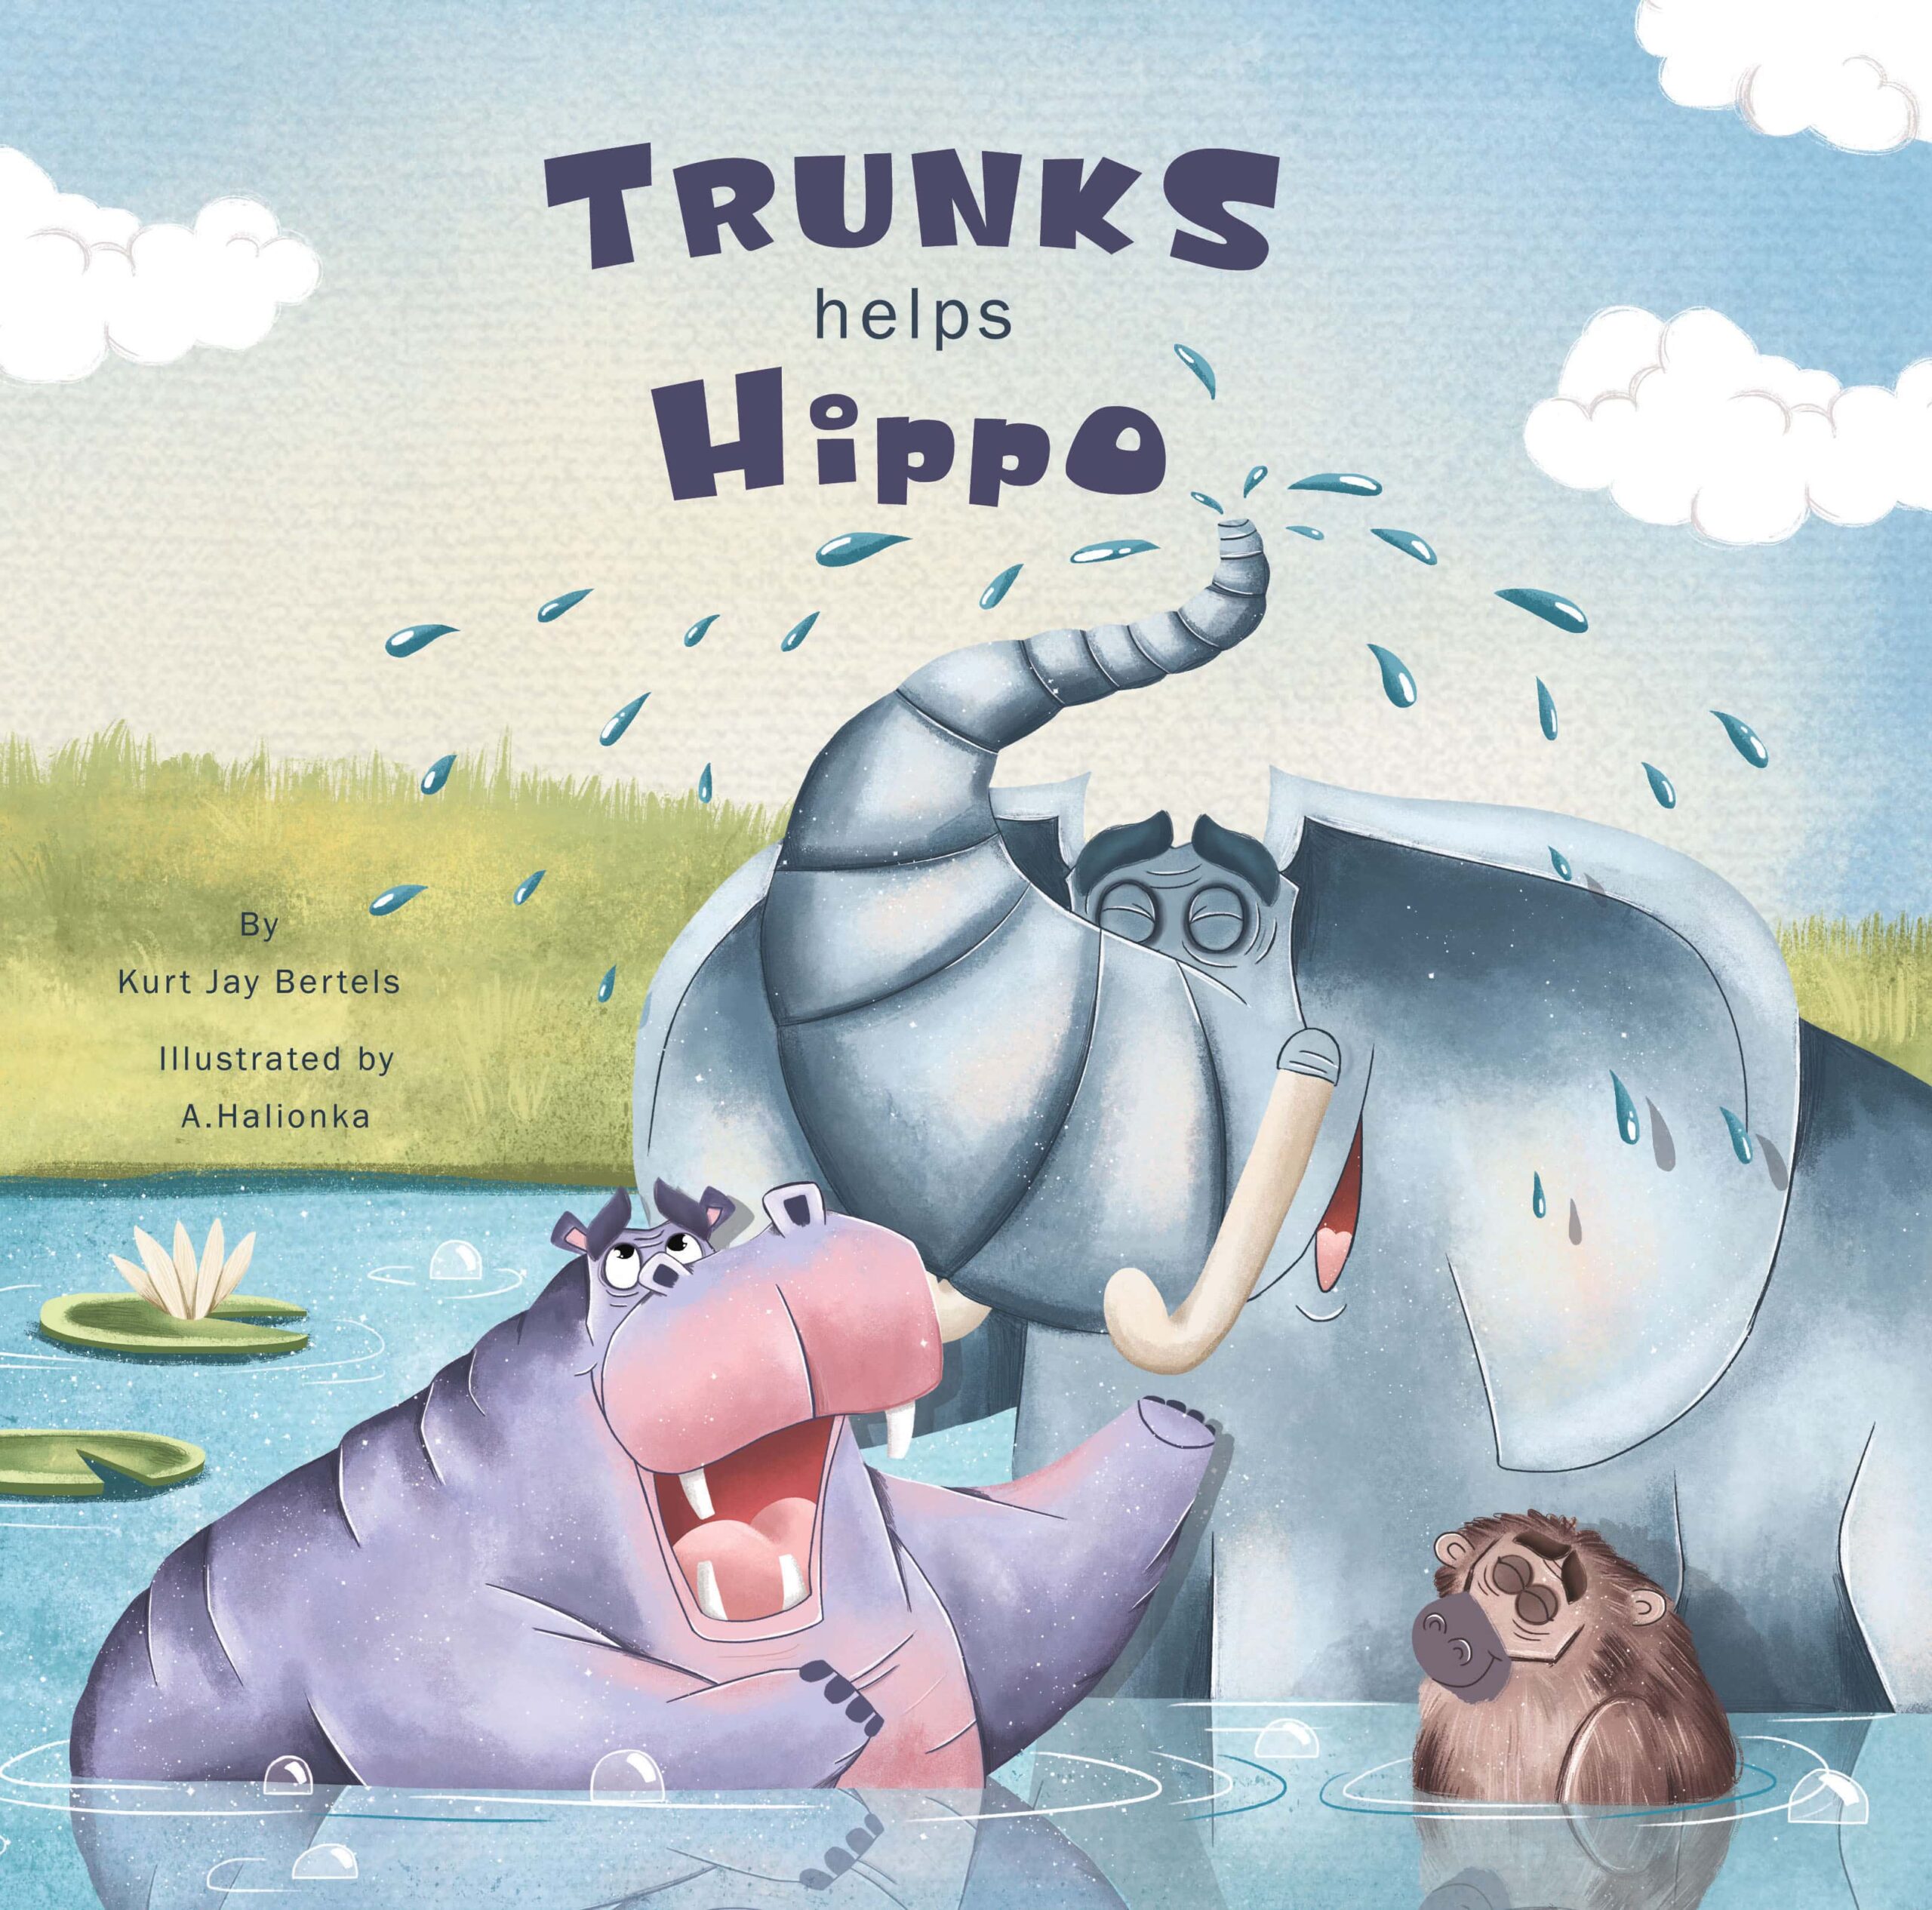 Children's book about Africa "Trunks helps hippo"